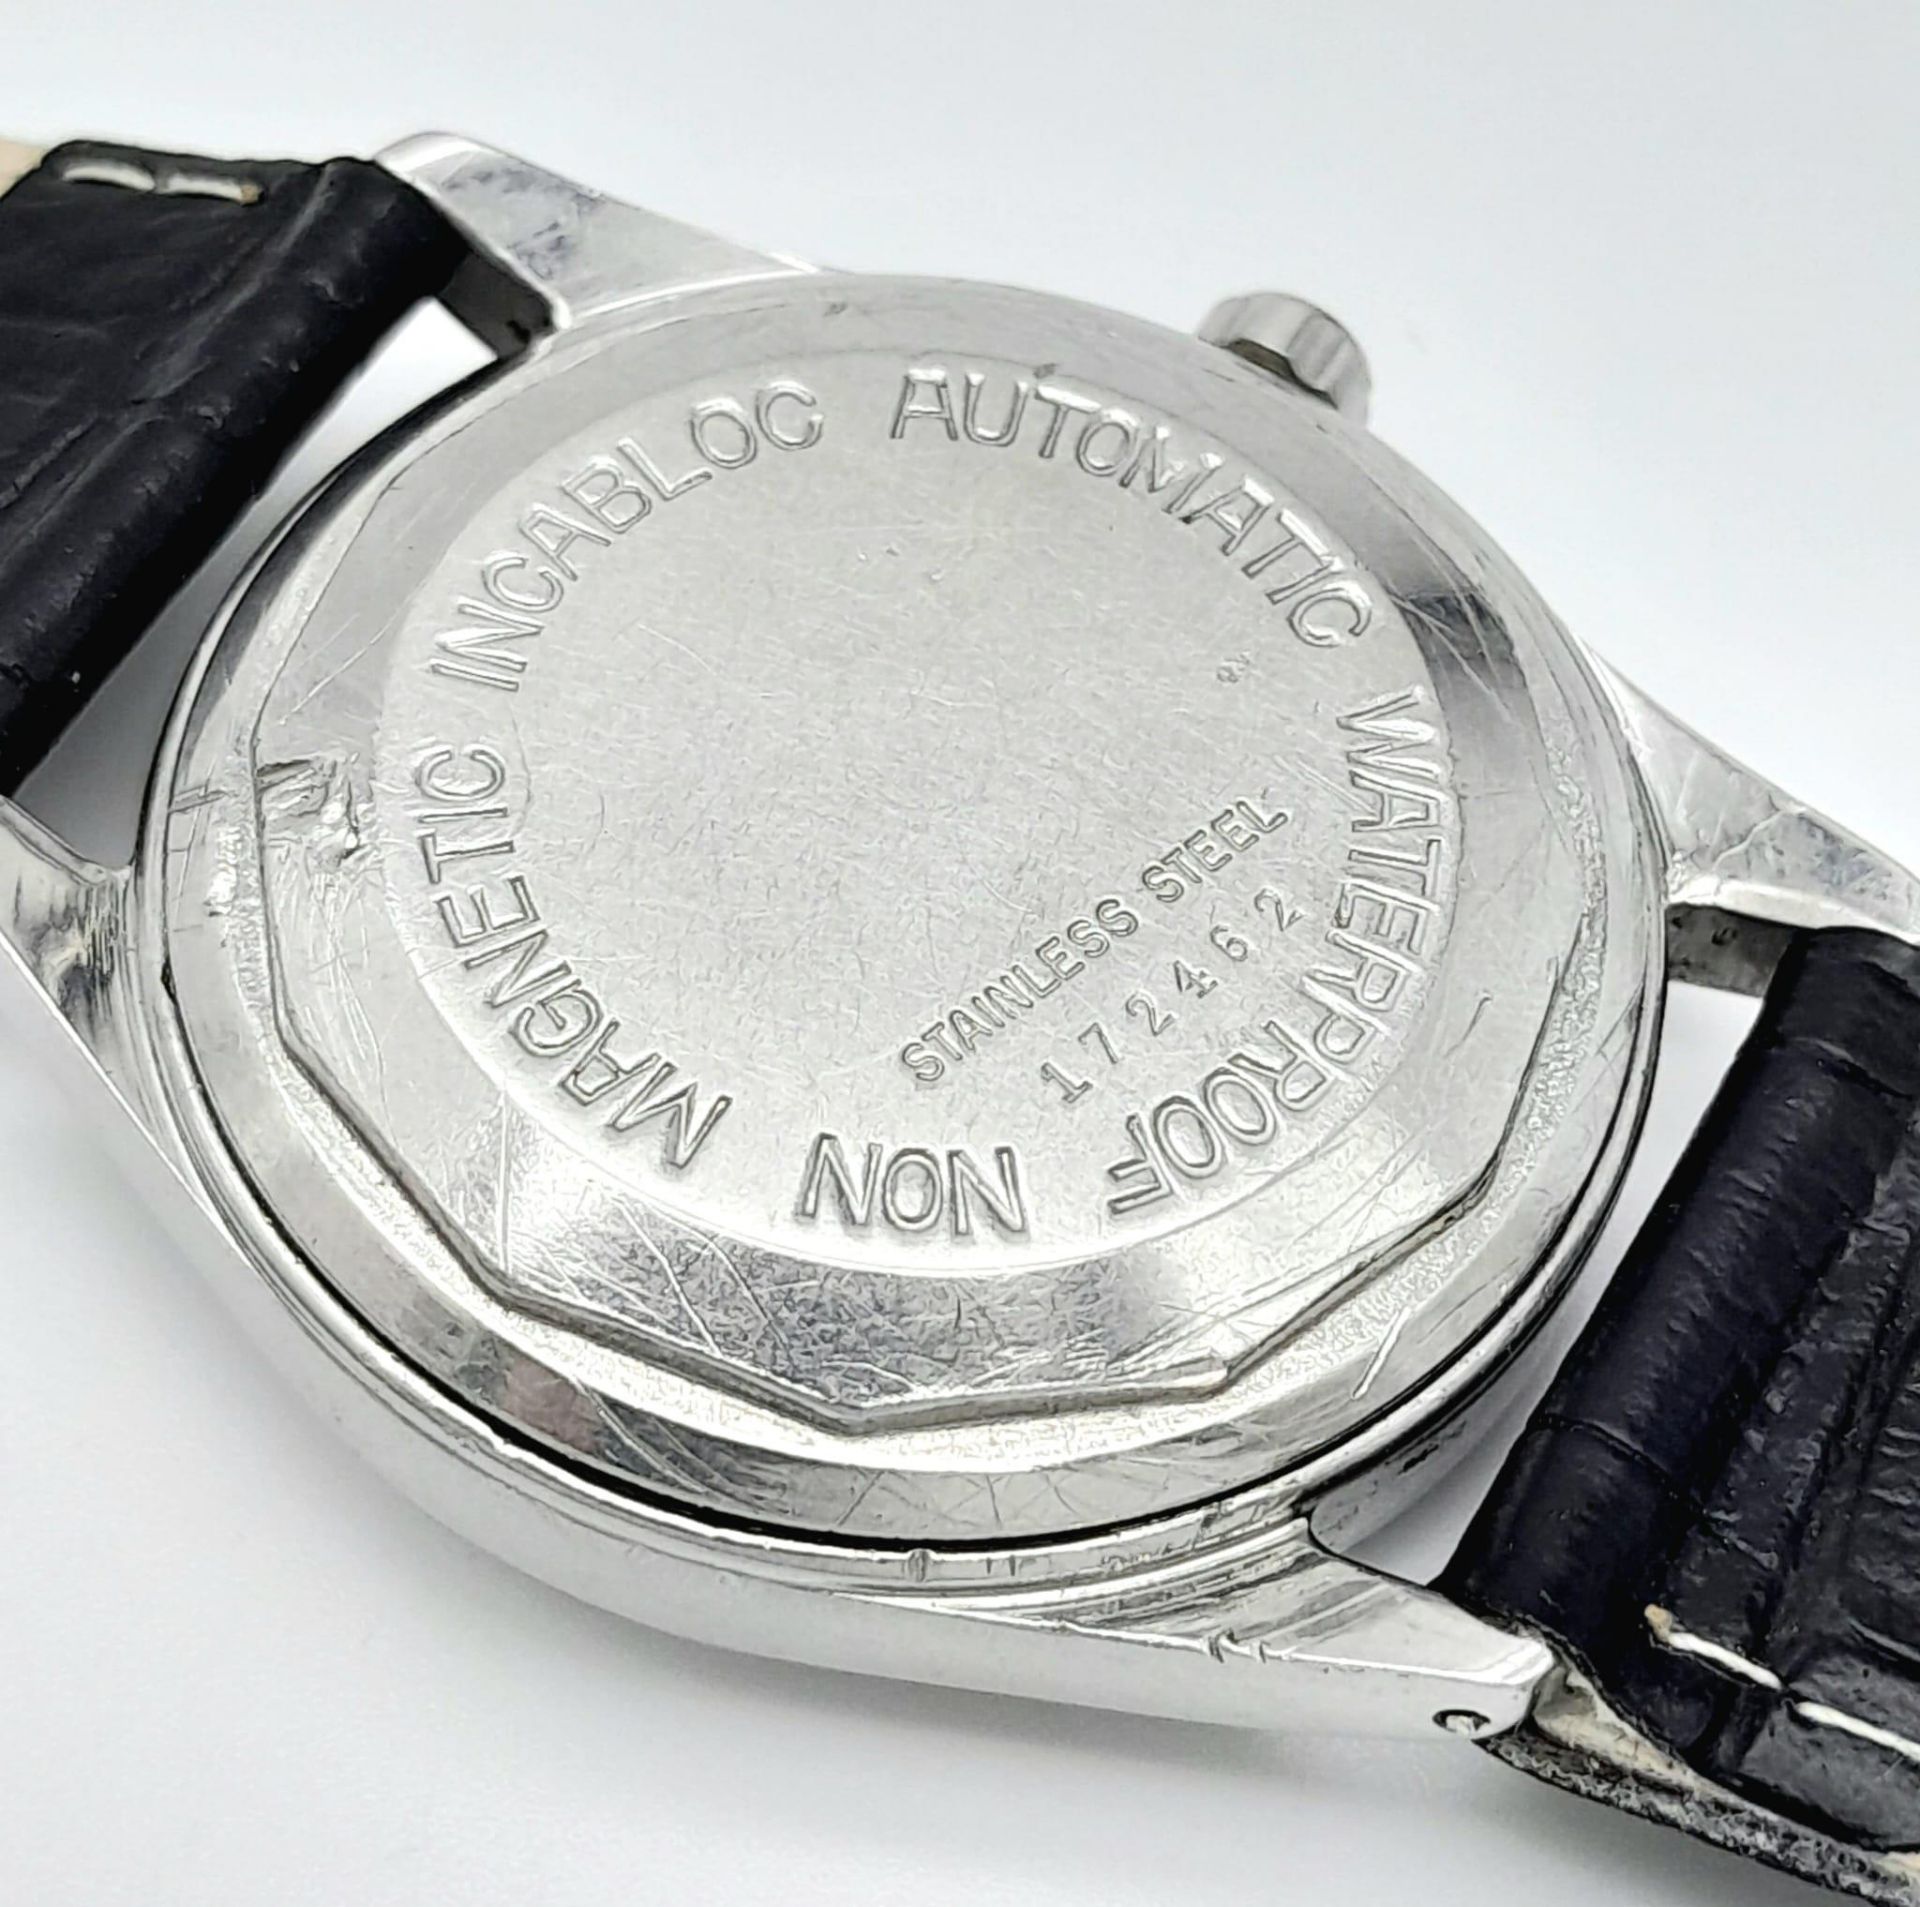 A Vintage Genicko Gents Mechanical Watch. Black leather strap. Stainless steel case - 36mm. Black - Image 8 of 11